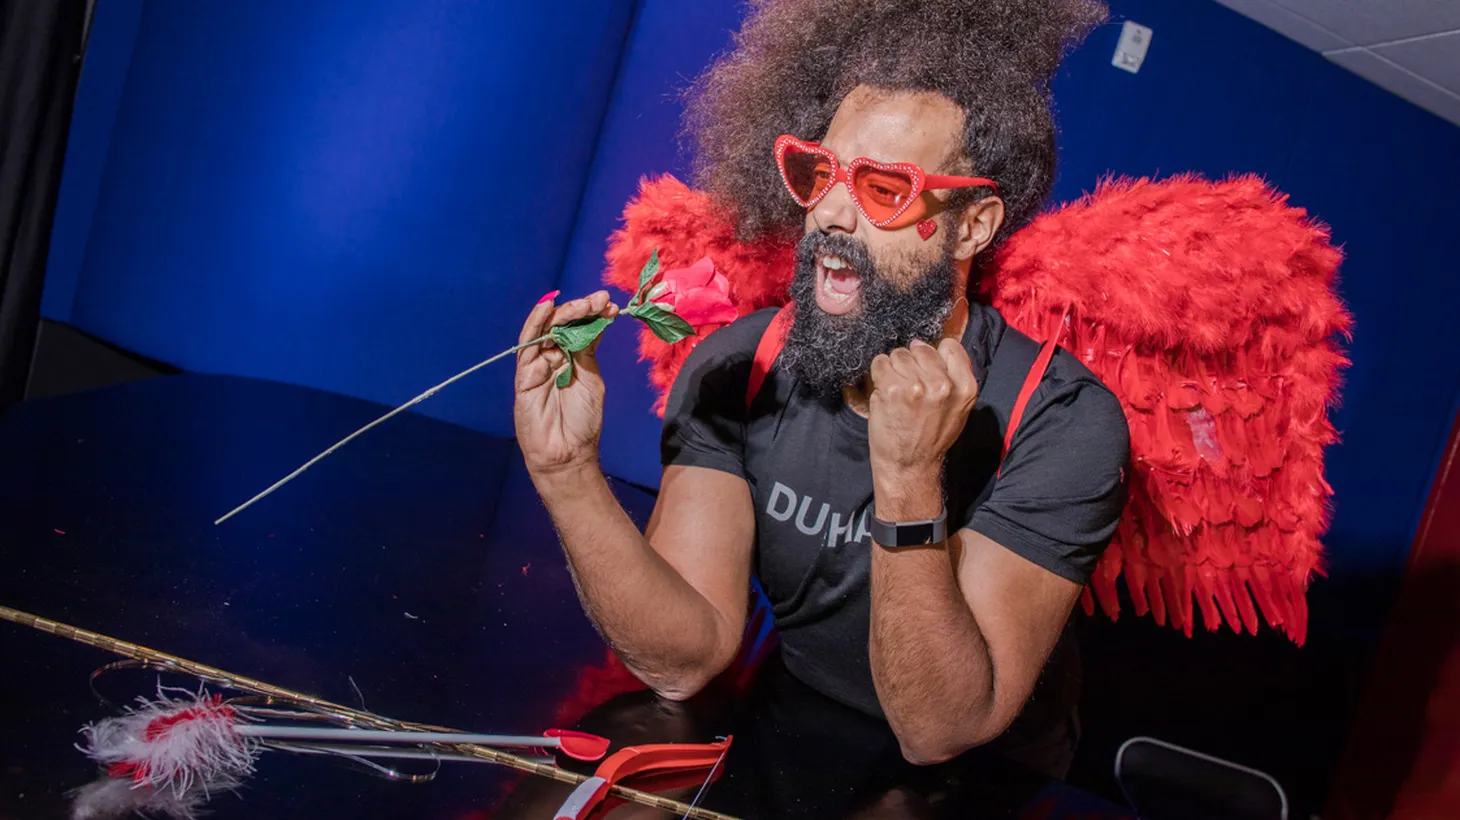 Eccentric, hilarious and endlessly creative, Reggie Watts is truly one of a kind. We called on the comedian/musician/beatboxer/bandleader to give us some lessons on love for our Valentine's Day special. (10am)